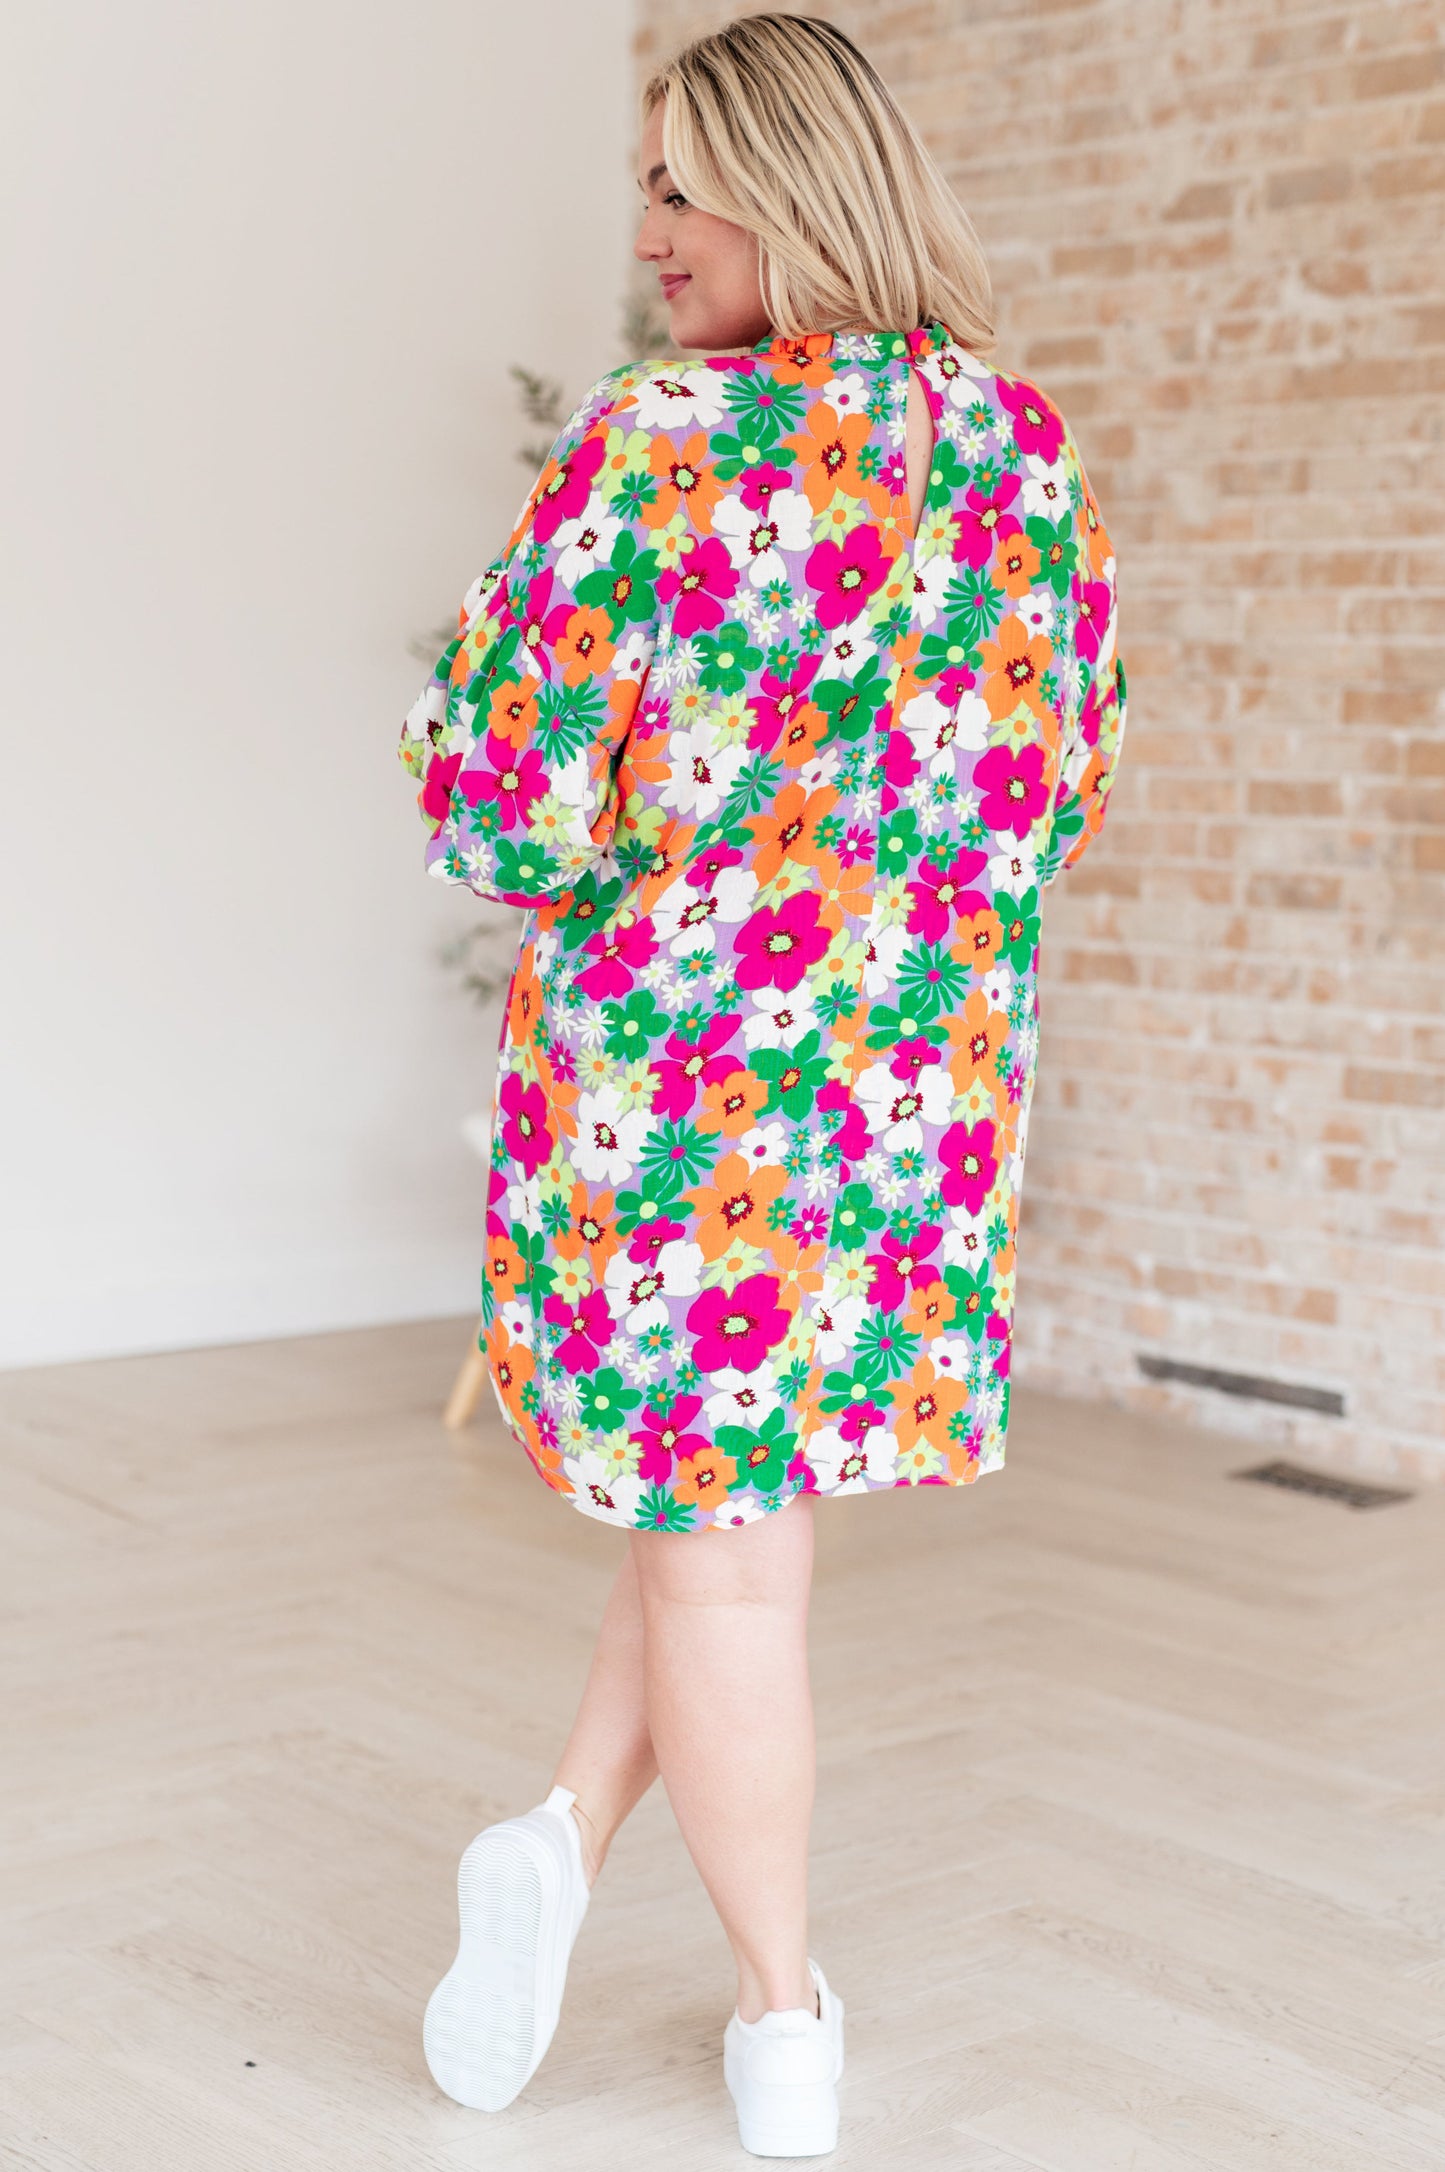 eleanor rigby floral dress